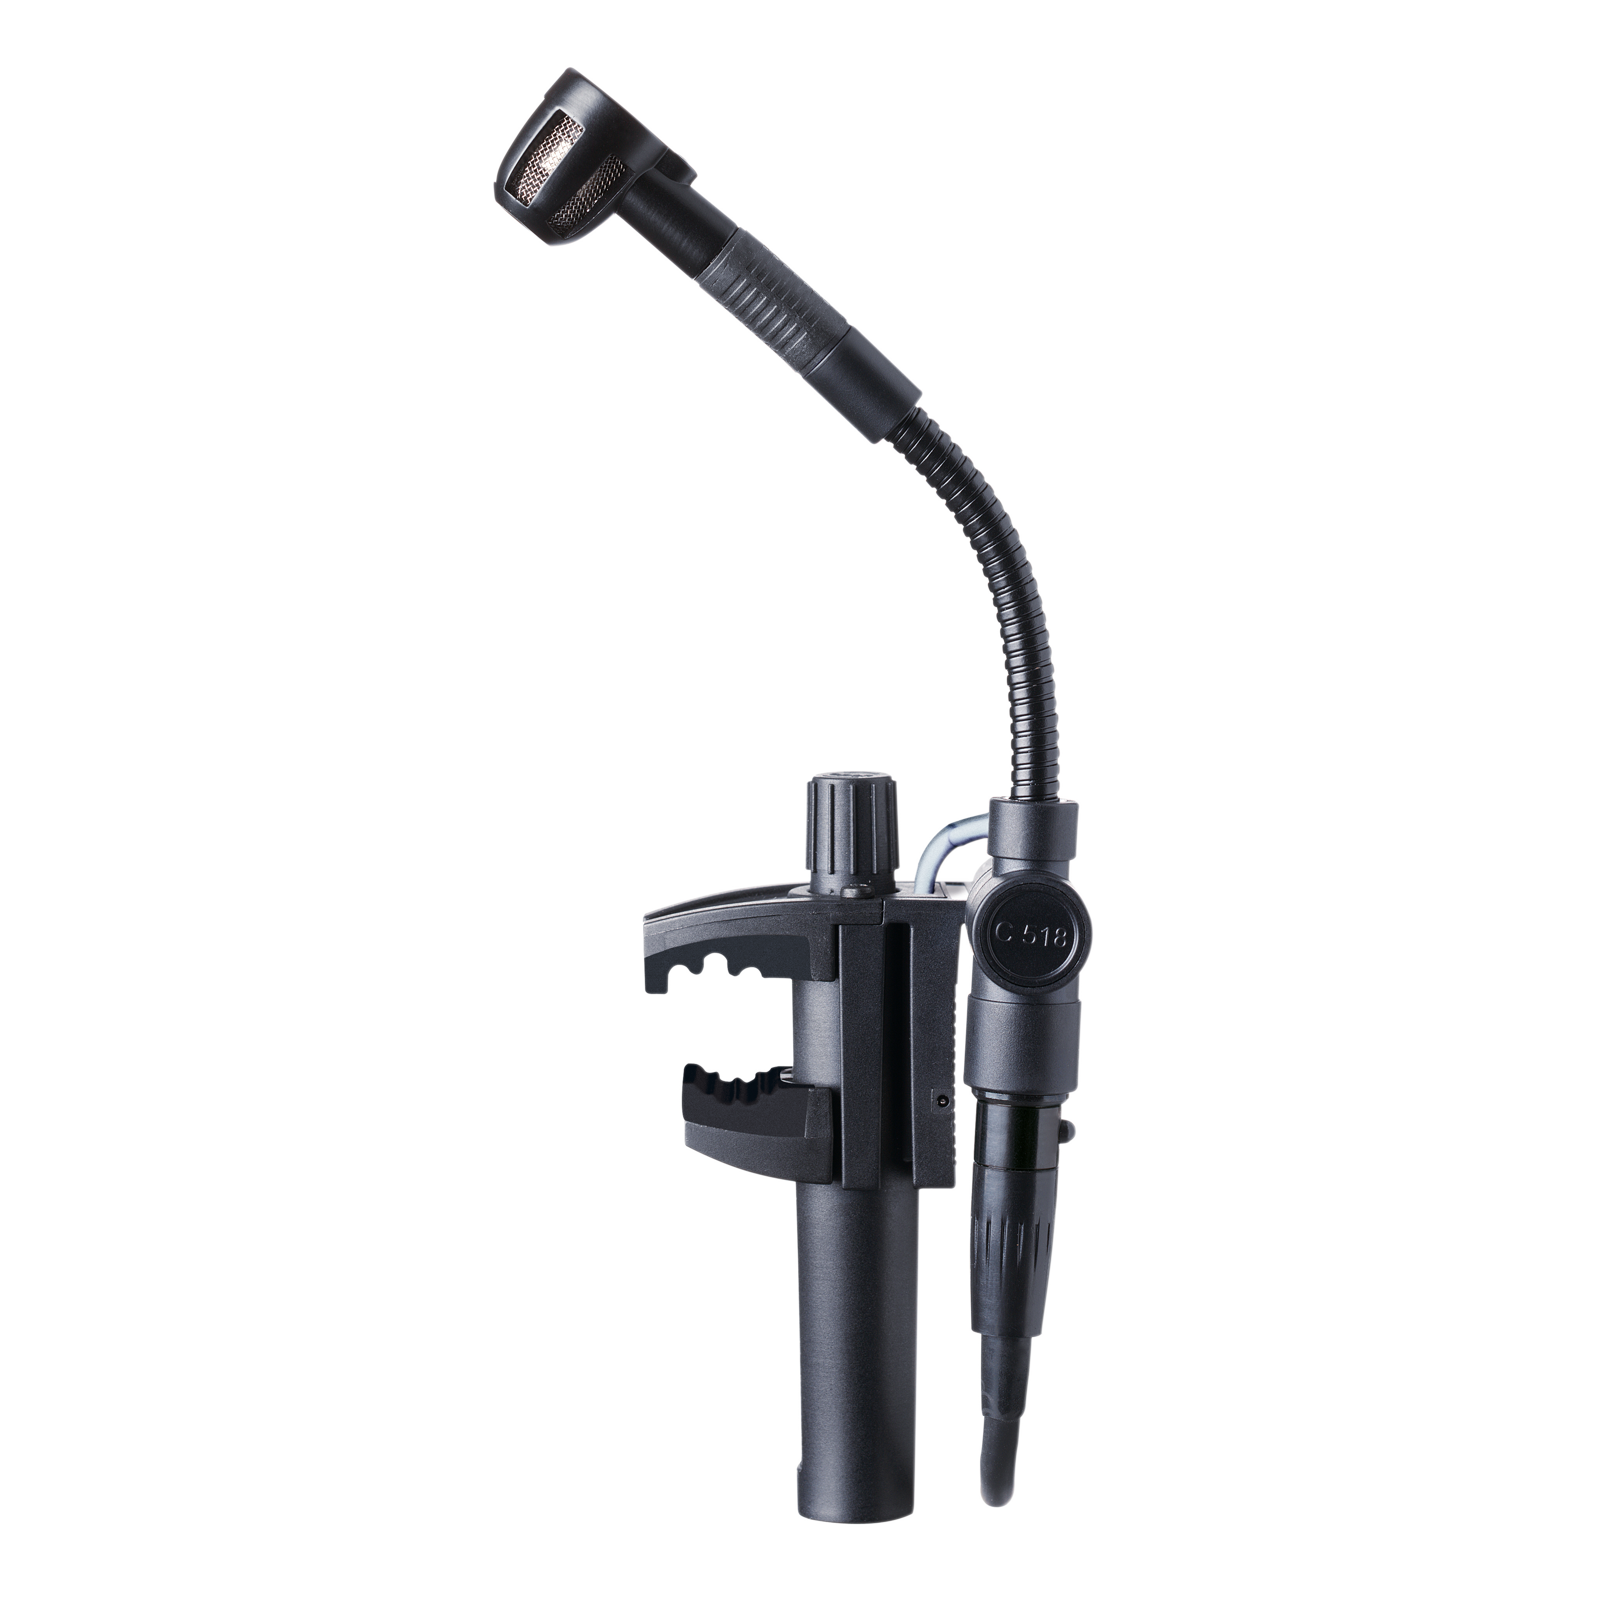 C518 M - Black - Professional miniature clamp-on condenser microphone with mini XLR to standard XLR cable - Hero